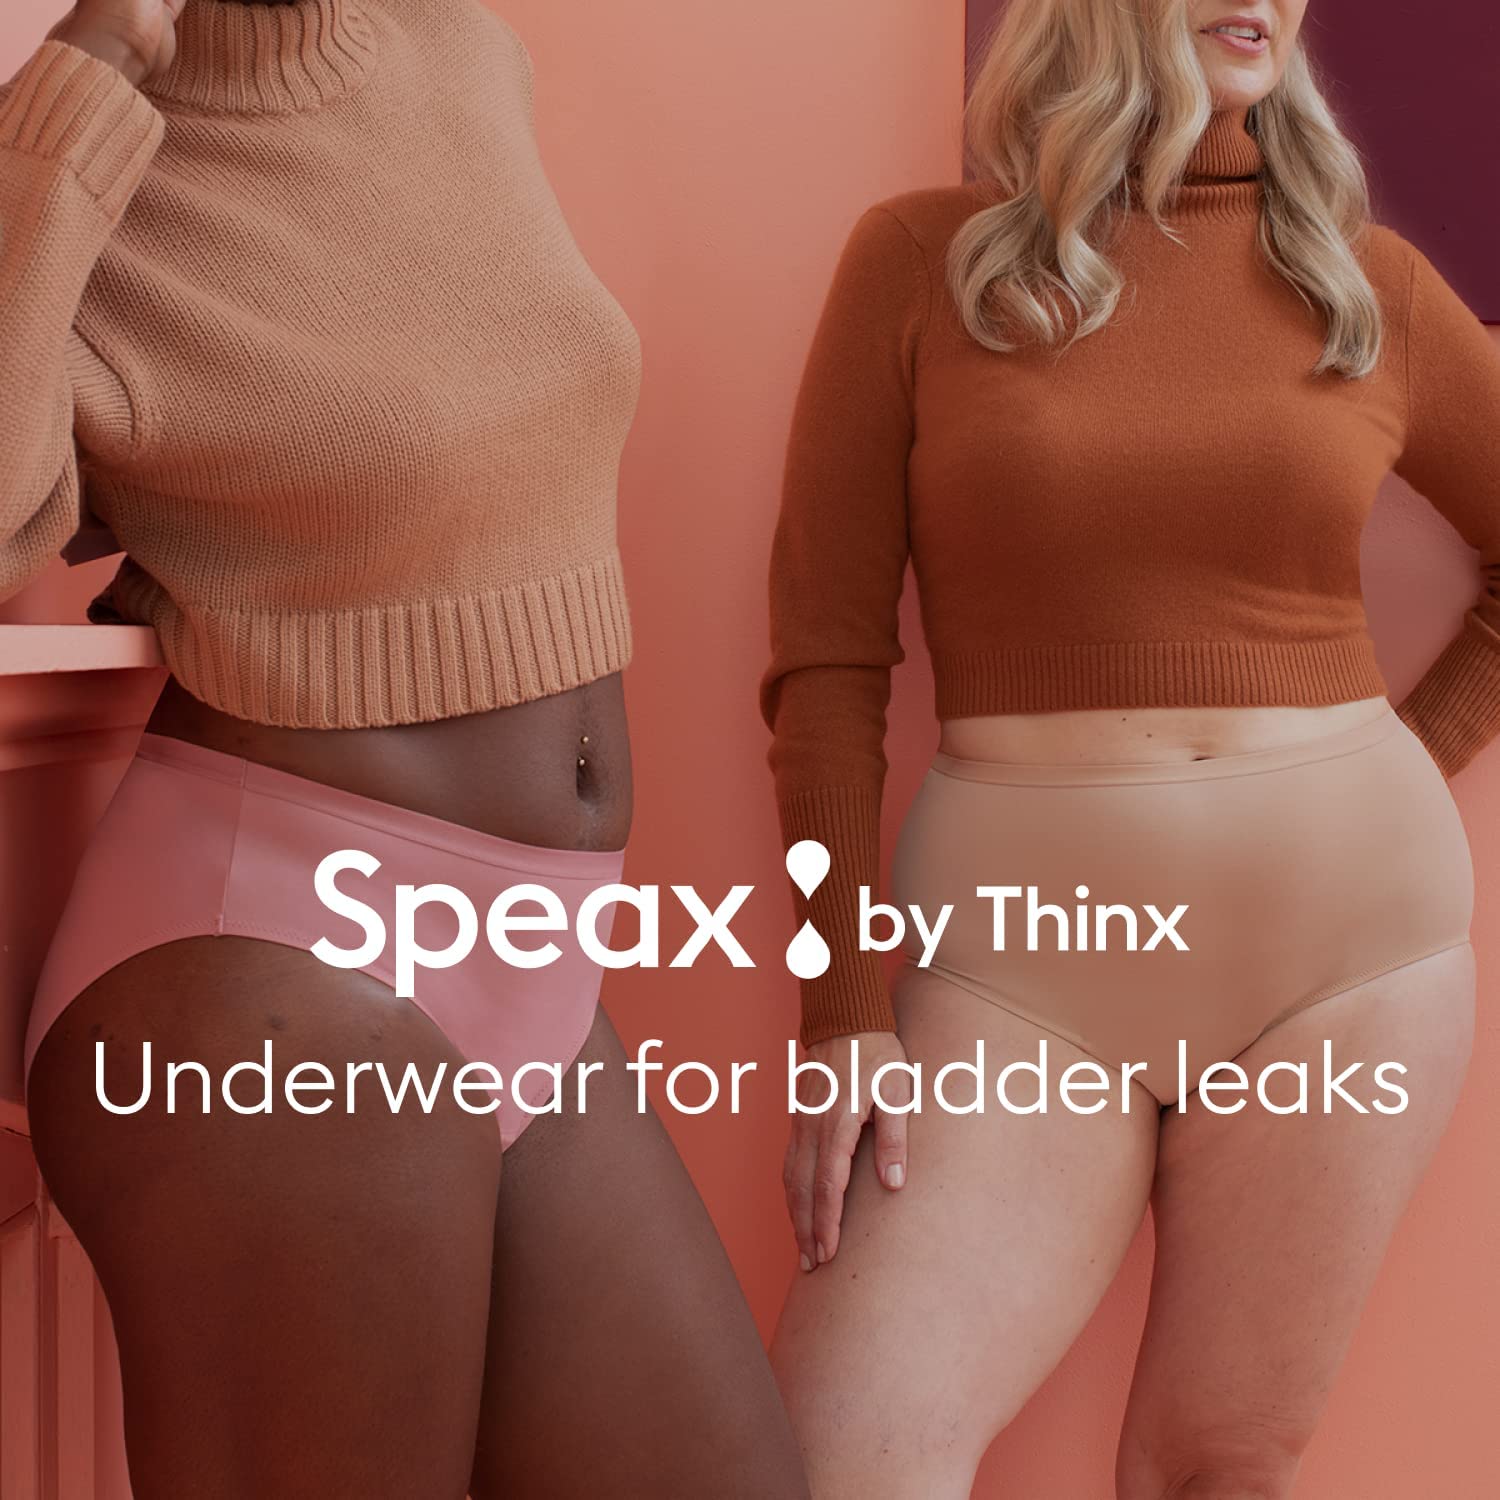 https://pelihealth.com/wp-content/uploads/2023/03/speax-by-thinx-french-cut-womens-underwear-product-image-six.jpg